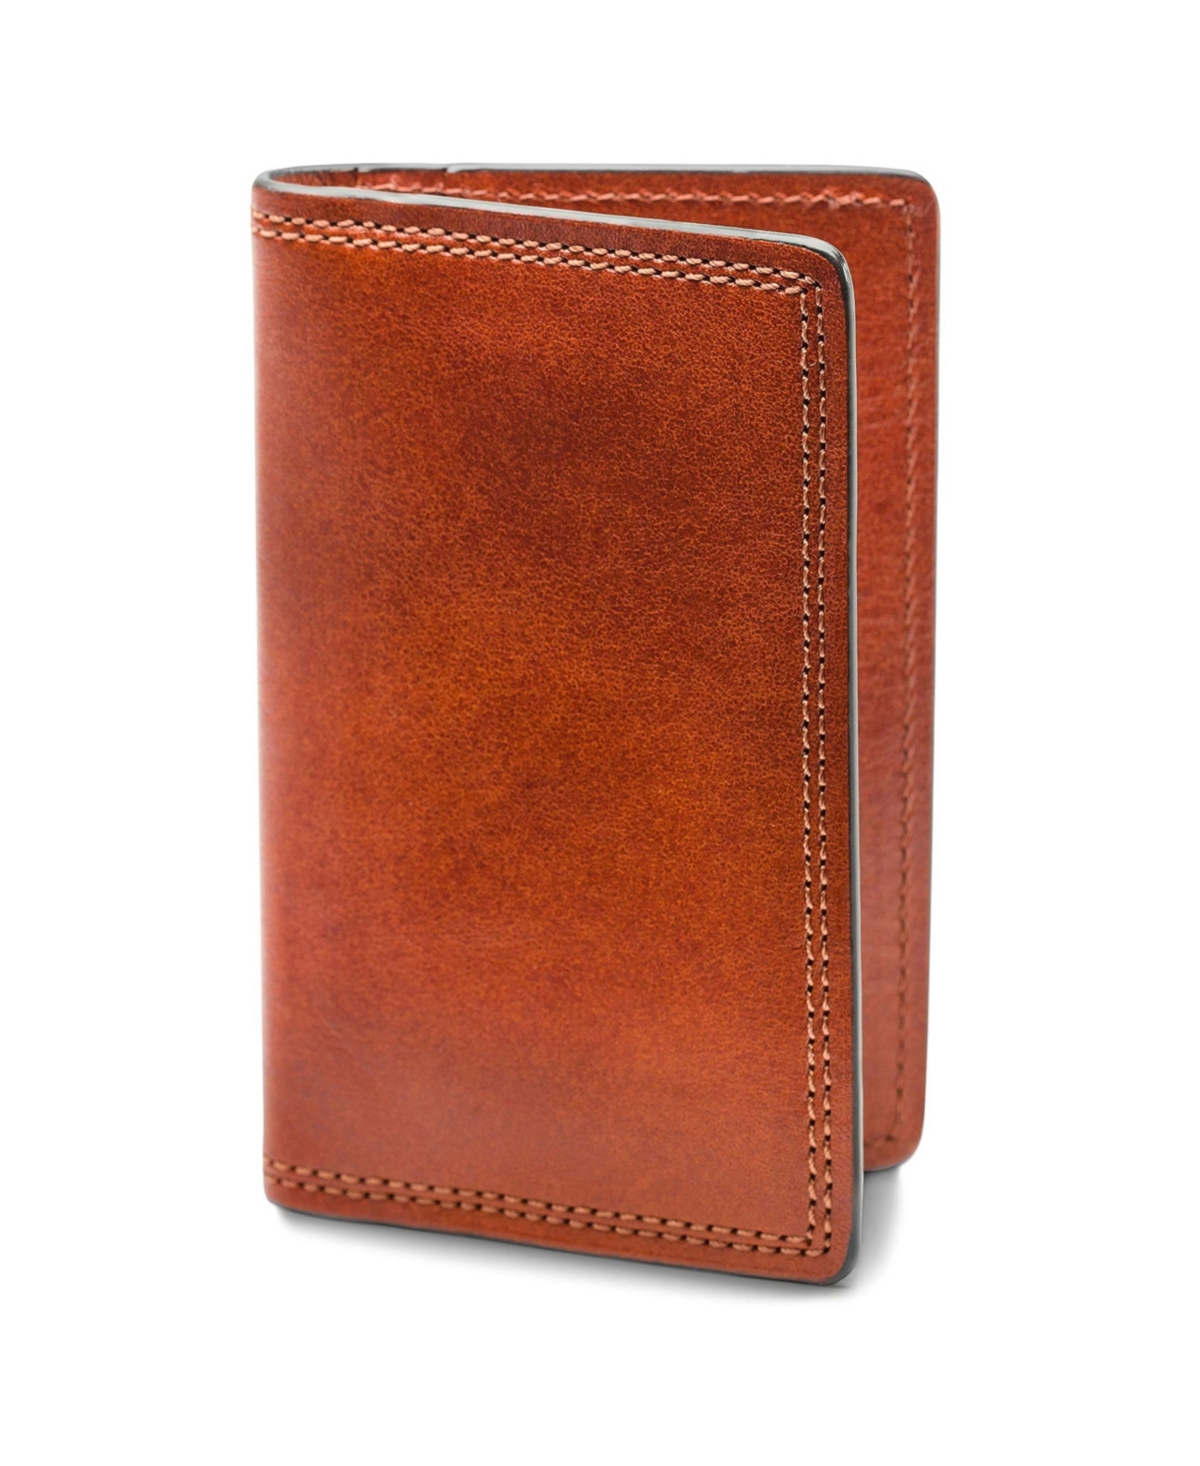 Men's Dolce Collection - Calling Card Case - Amber